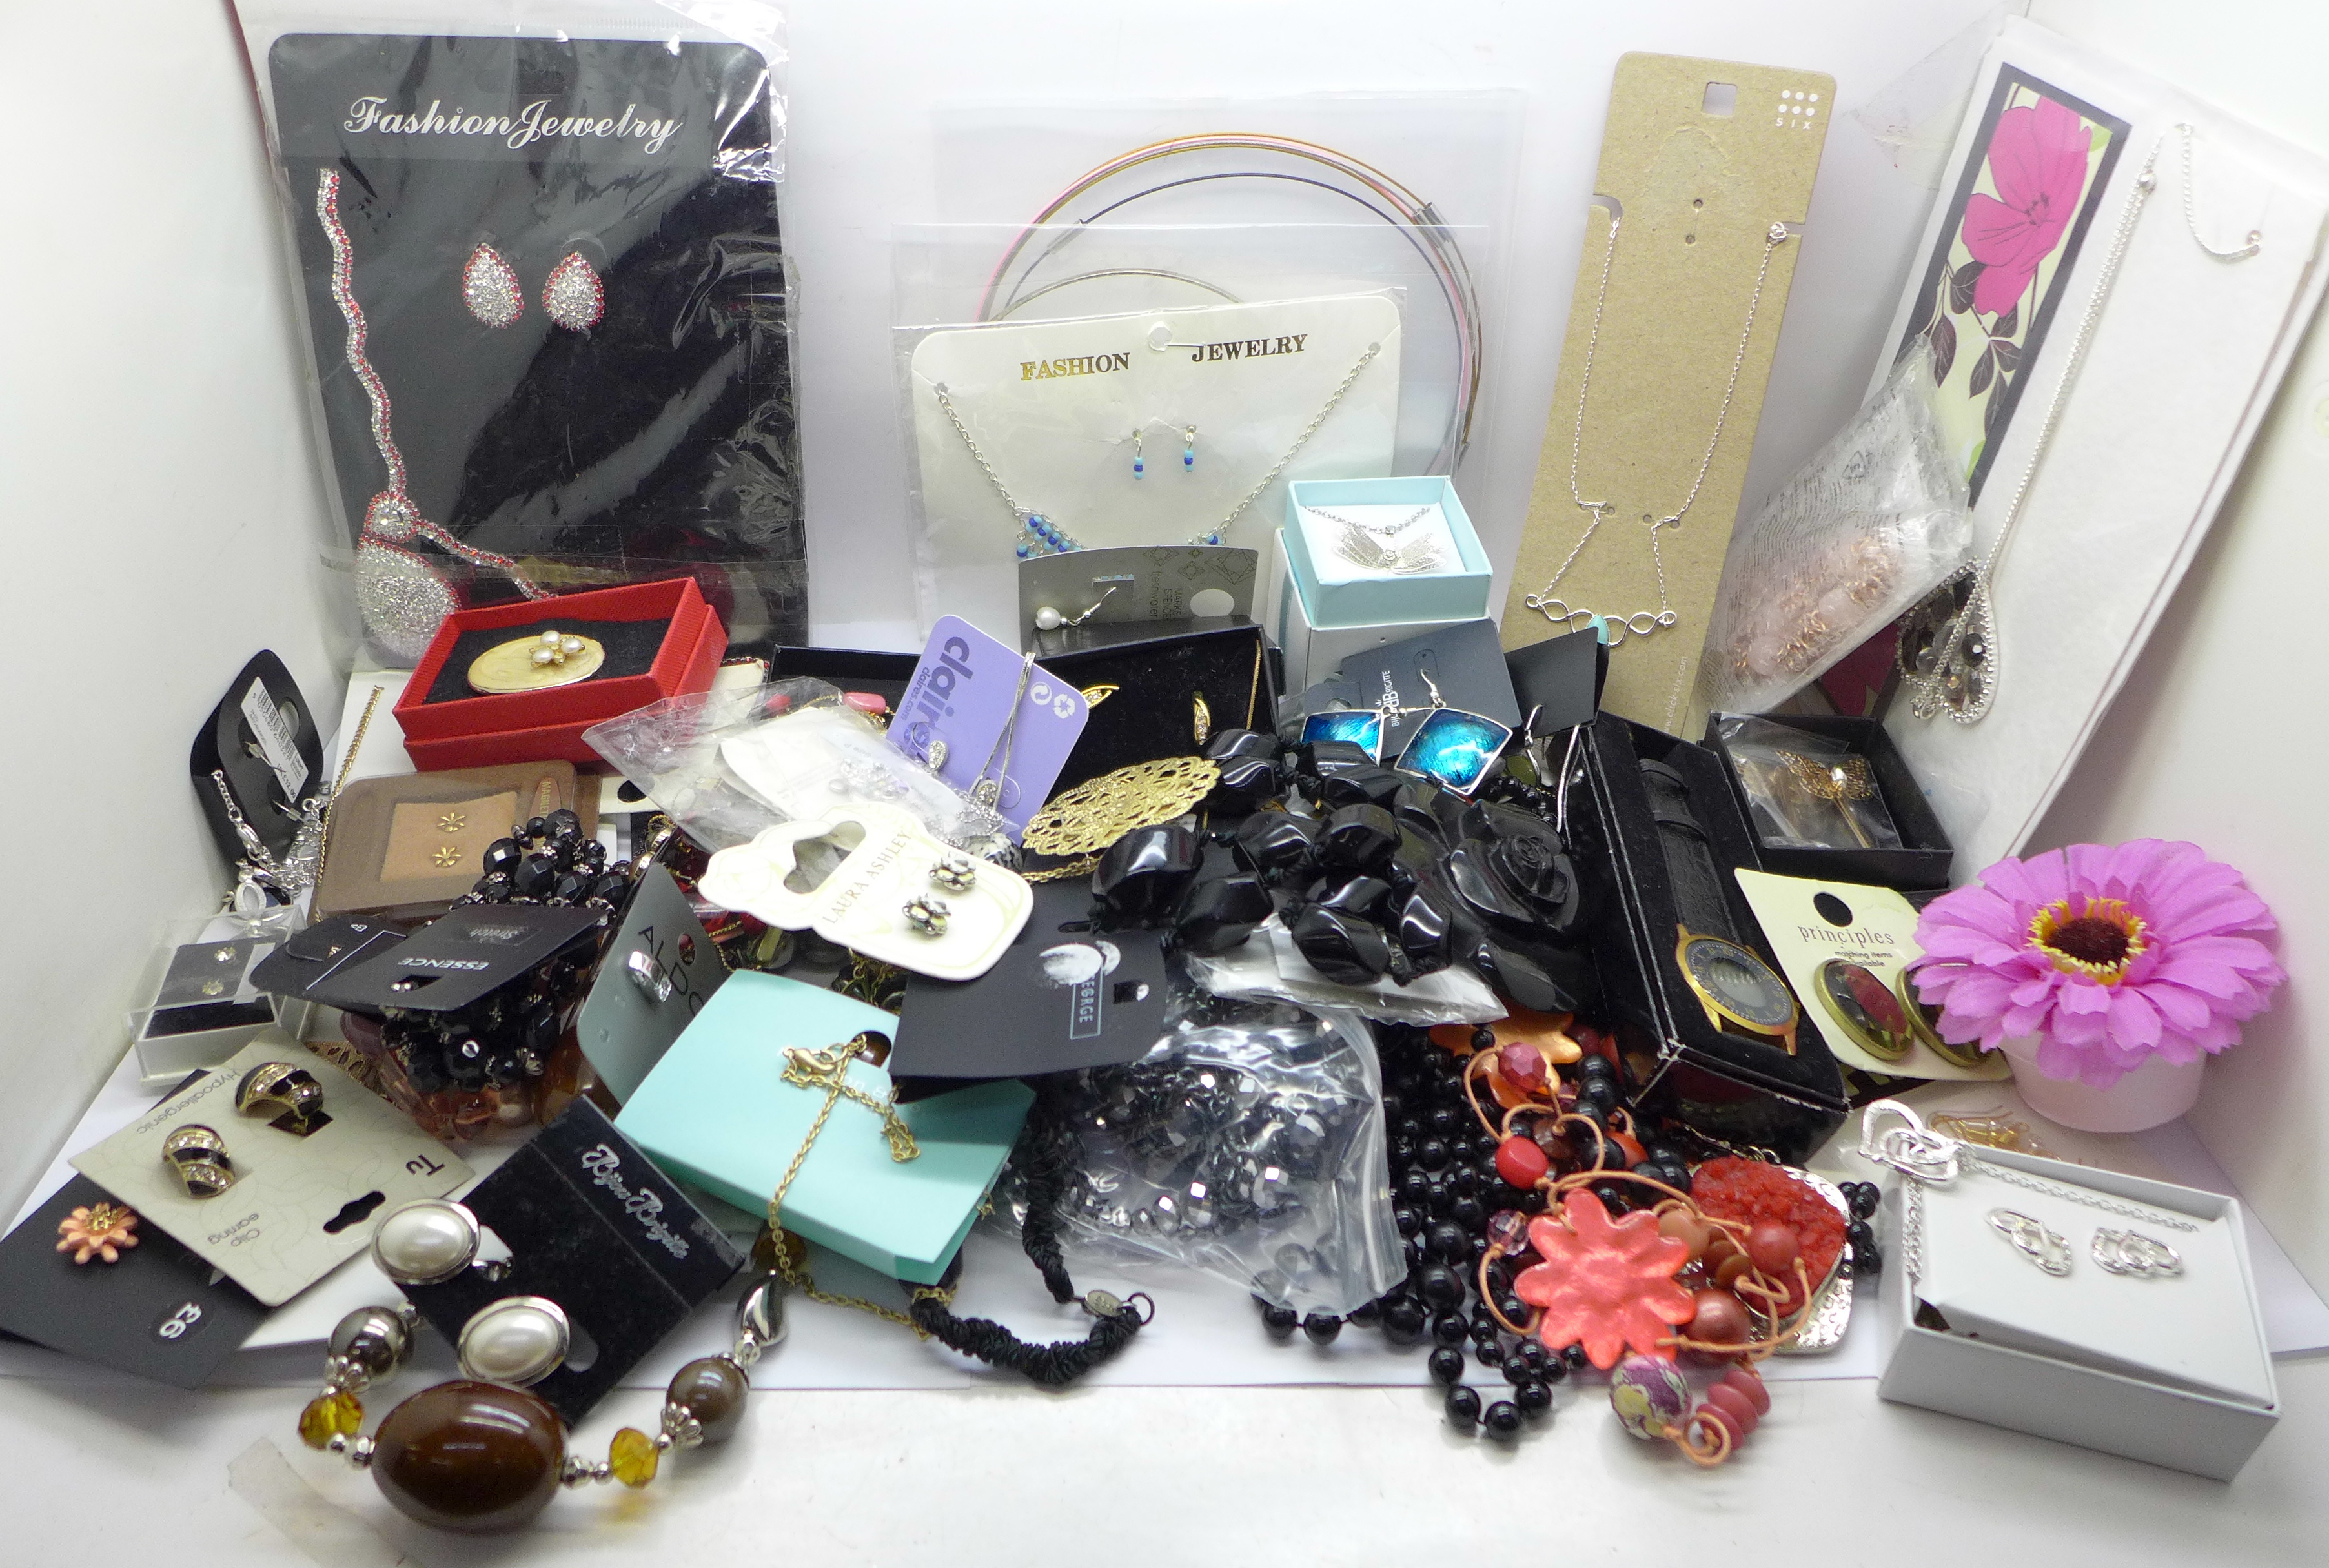 A quantity of packaged and unused jewellery